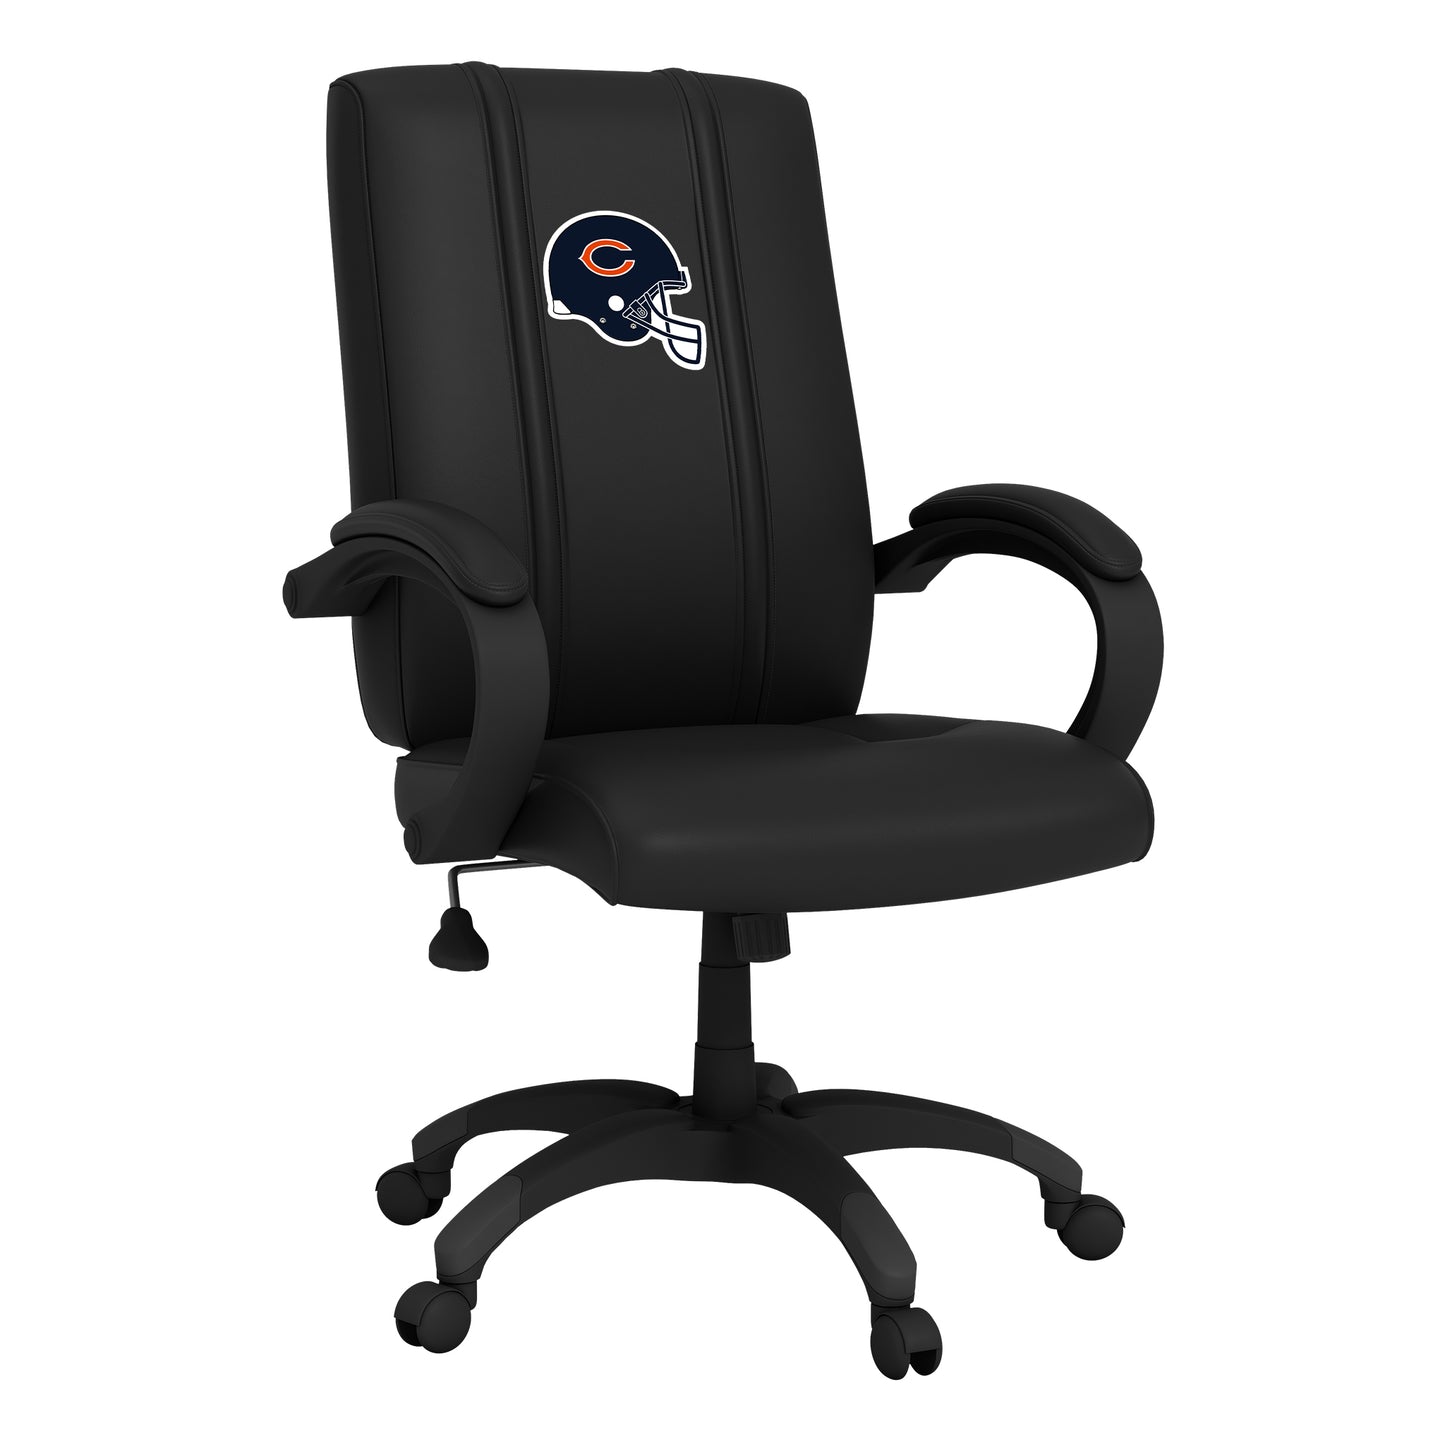 Office Chair 1000 with  Chicago Bears Helmet Logo